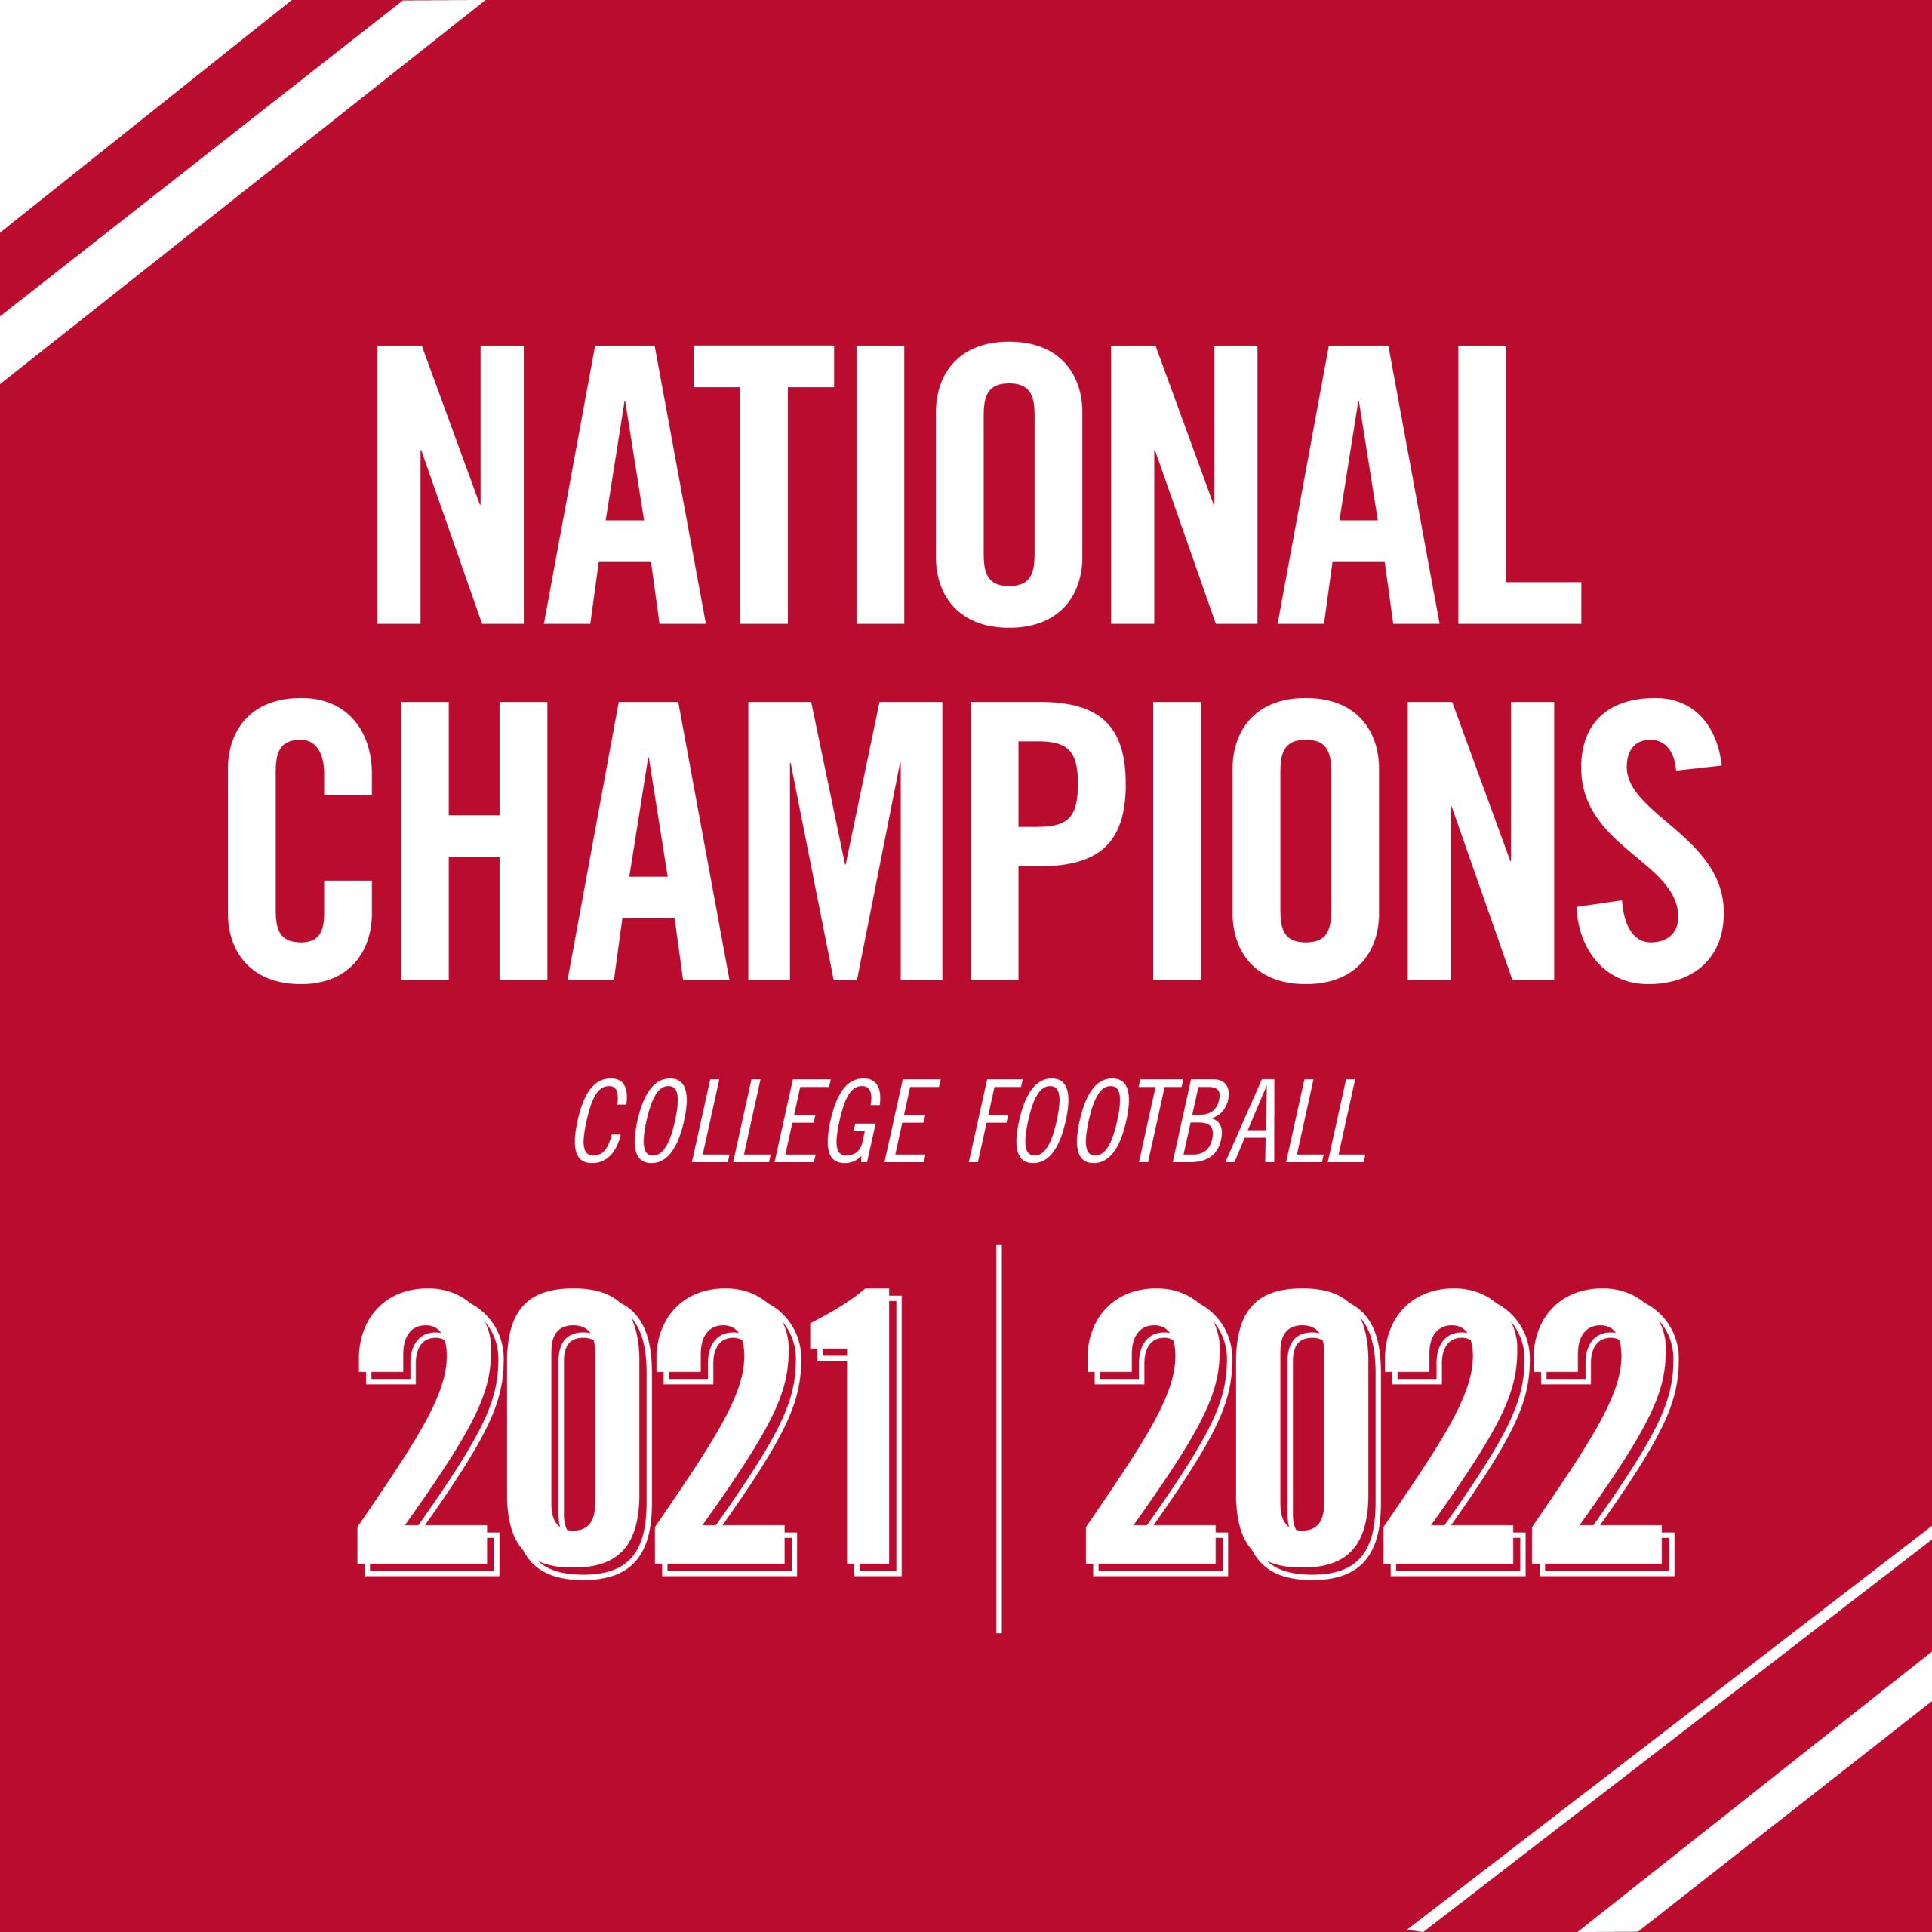 Graphic: National Champions College Football for the 2021-2022 Season